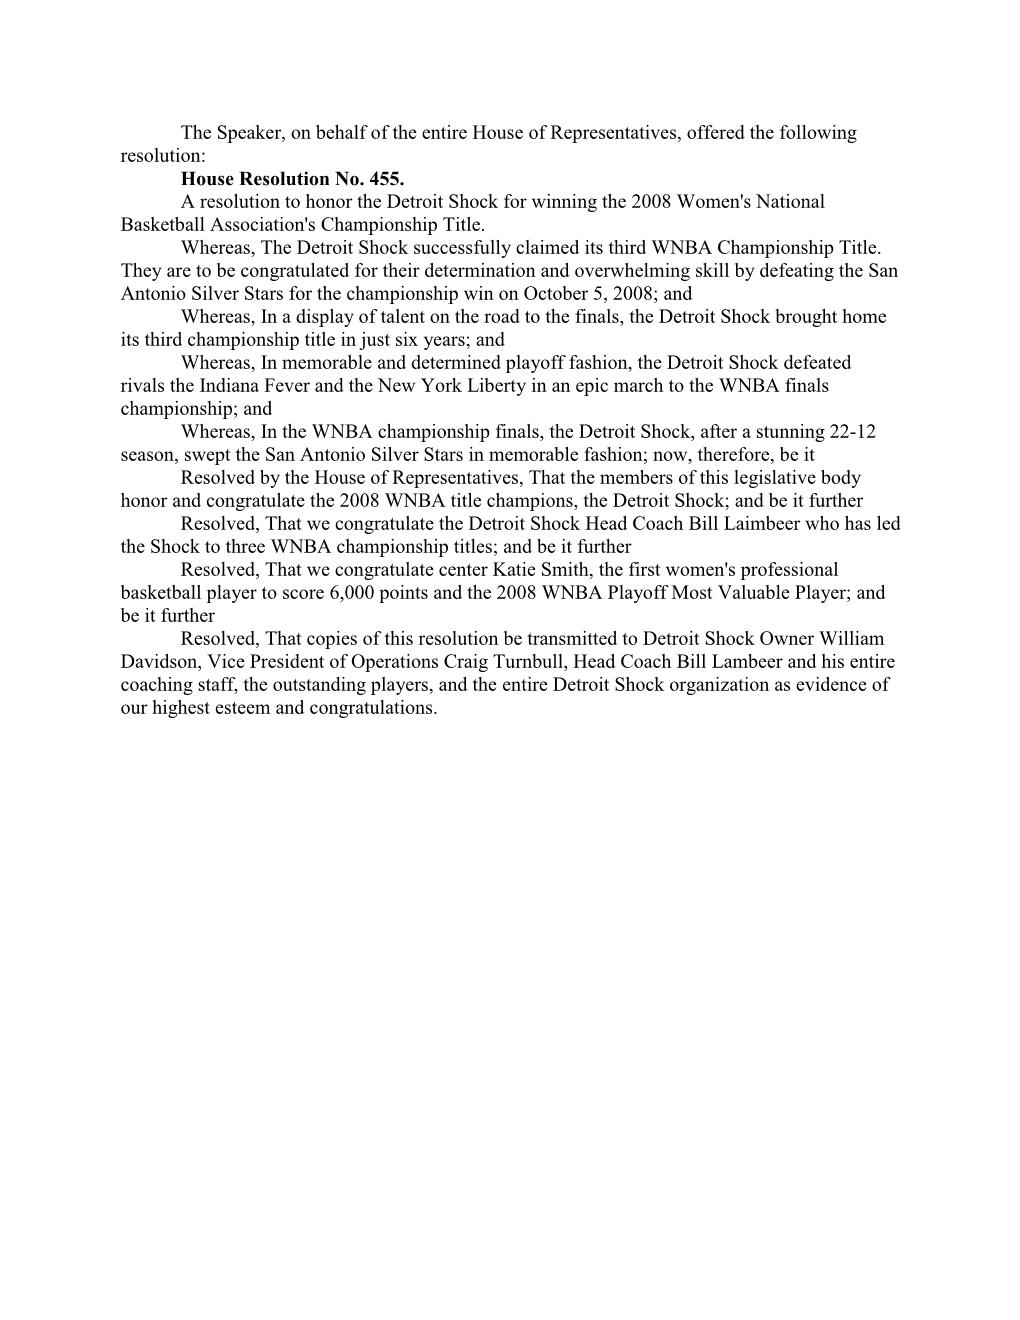 House Resolution No. 455. a Resolution to Honor the Detroit Shock for Winning the 2008 Women's National Basketball Association's Championship Title